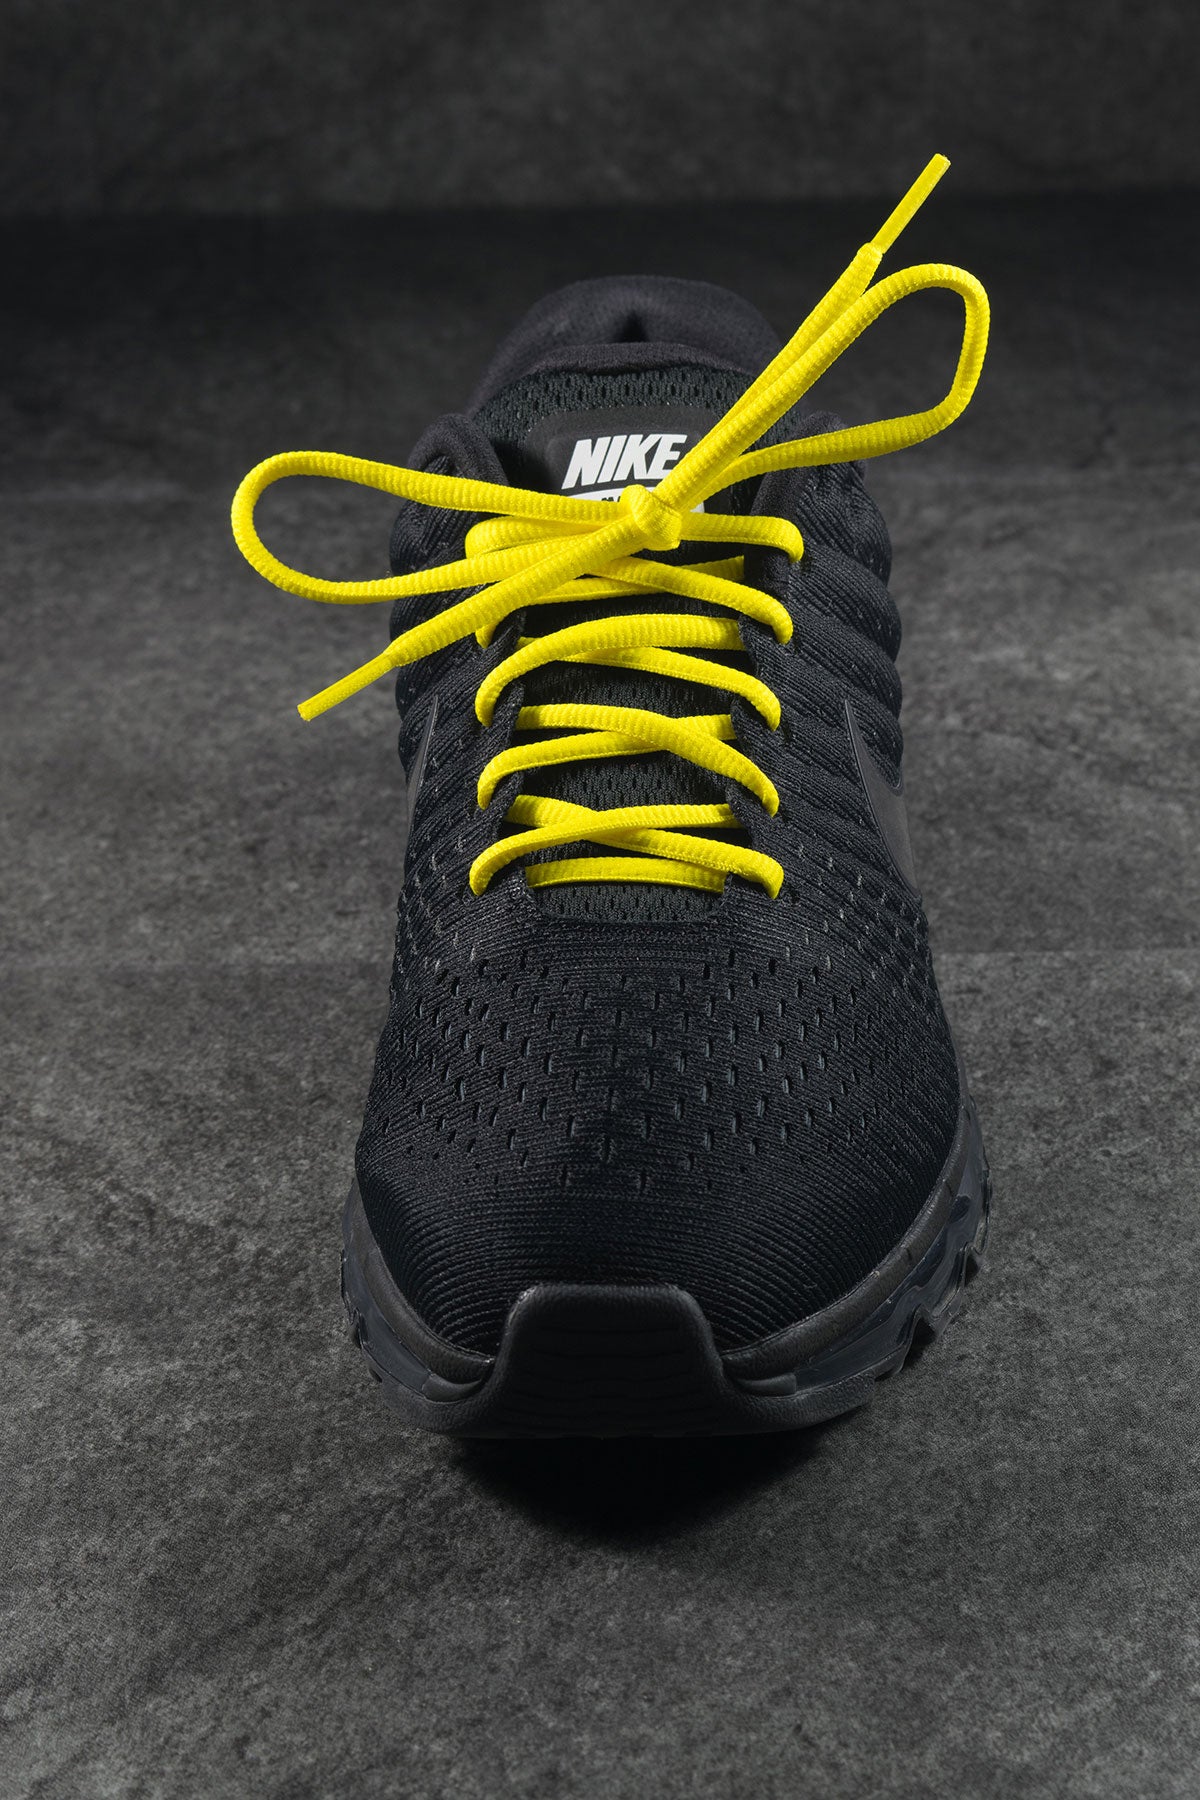 black and yellow shoelaces